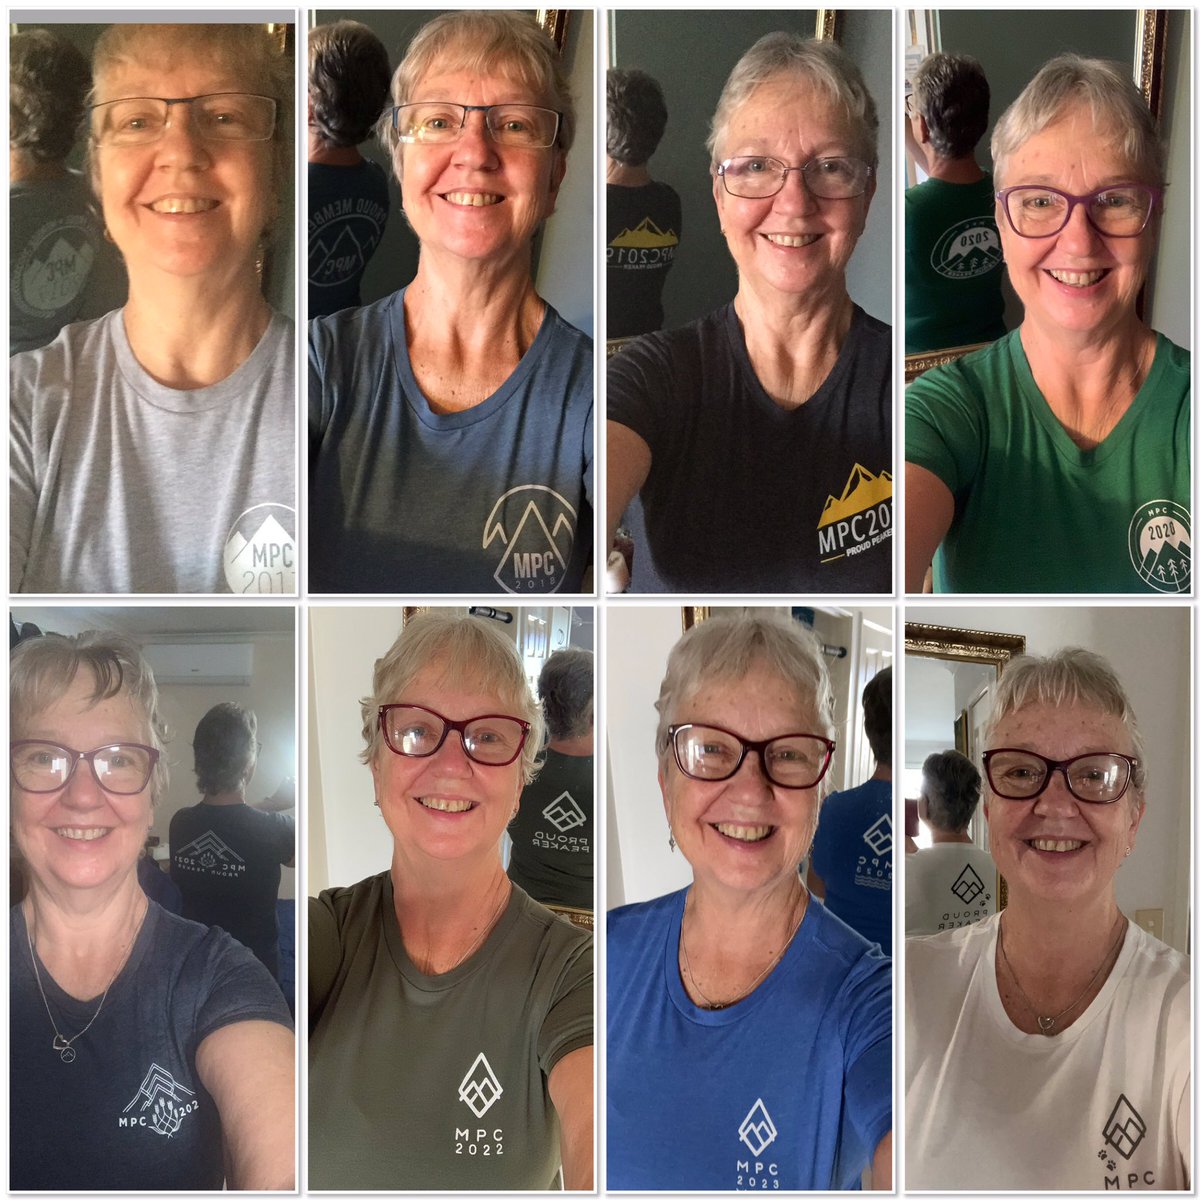 @MyPeakChallenge @SamHeughan I love all my #MPC tees, I have always worn them with pride!